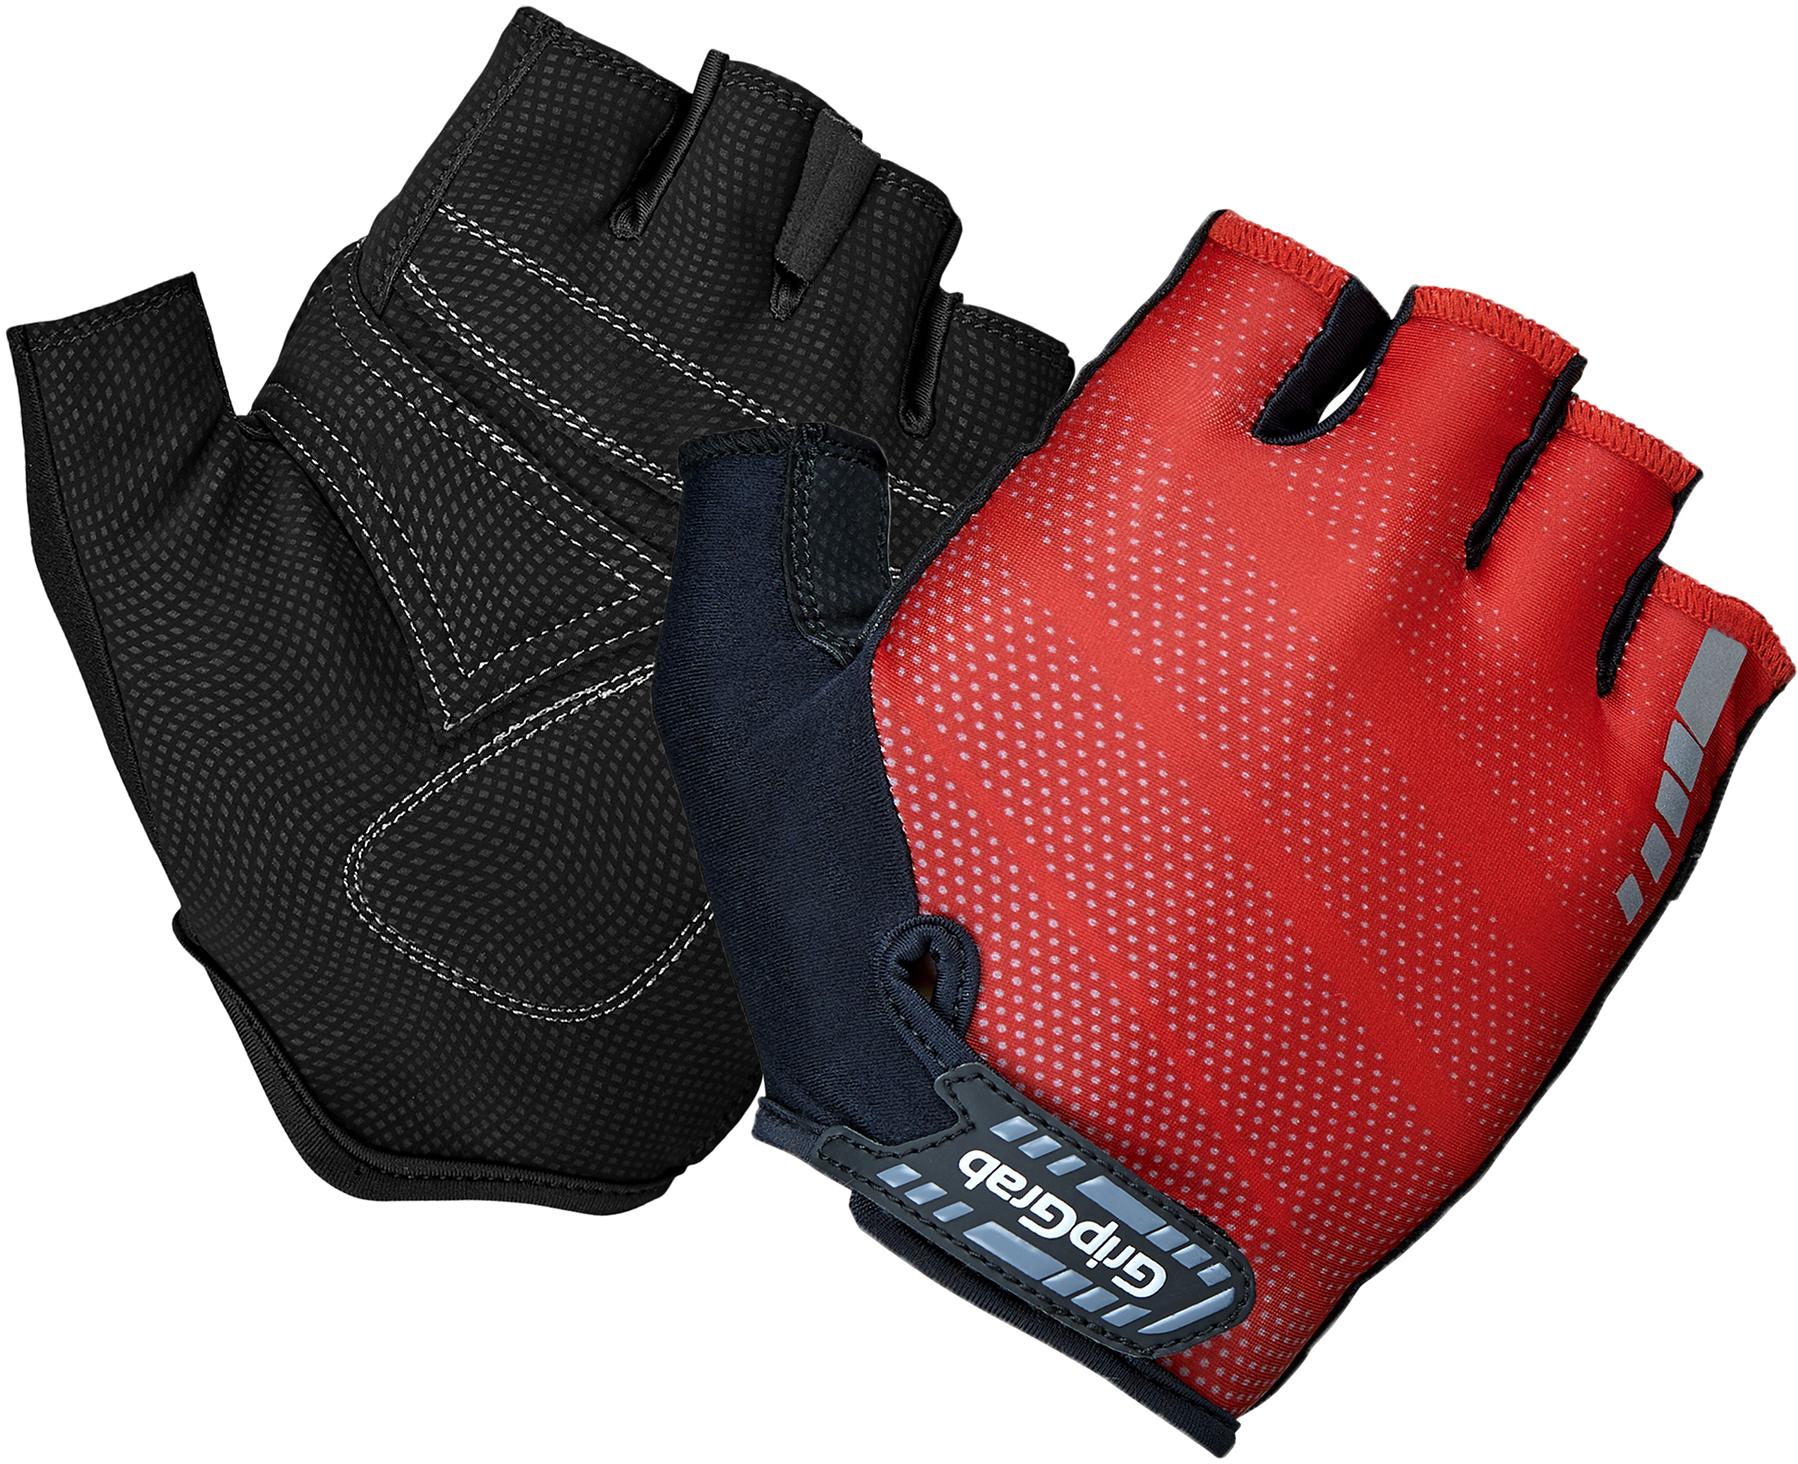 Gripgrab Rouleur Padded Short Finger Glove - Red